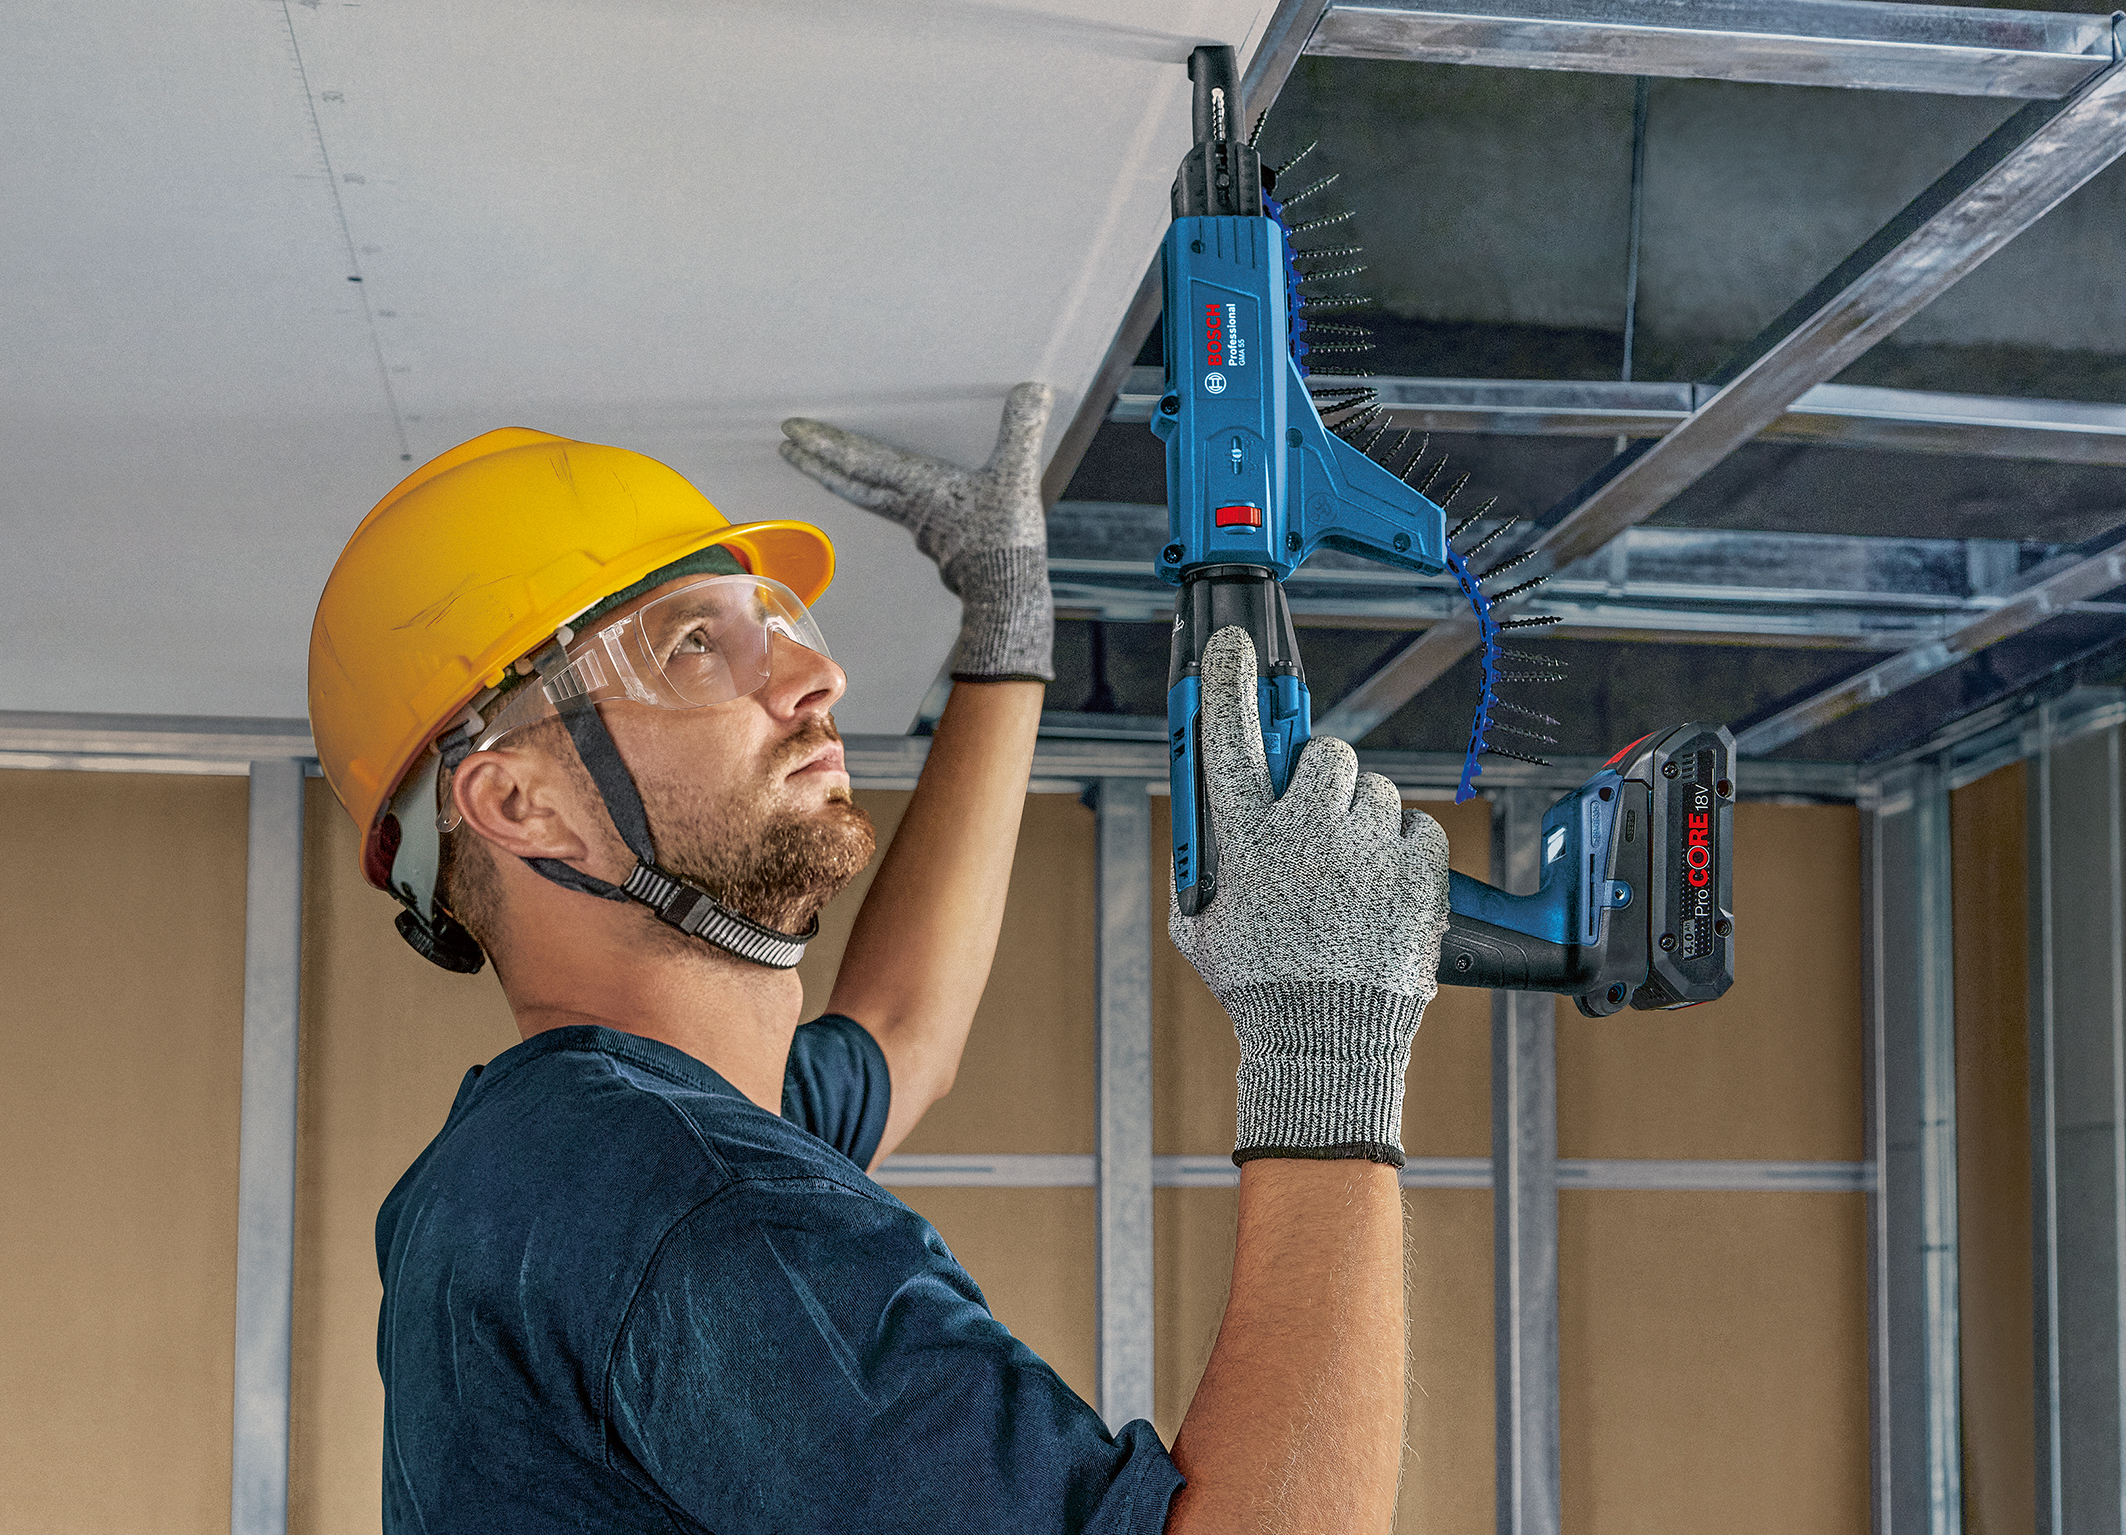 Carry out serial applications even more efficiently with magazine attachment: GTB 18V-45 Professional cordless drywall screwdriver from Bosch for professionals